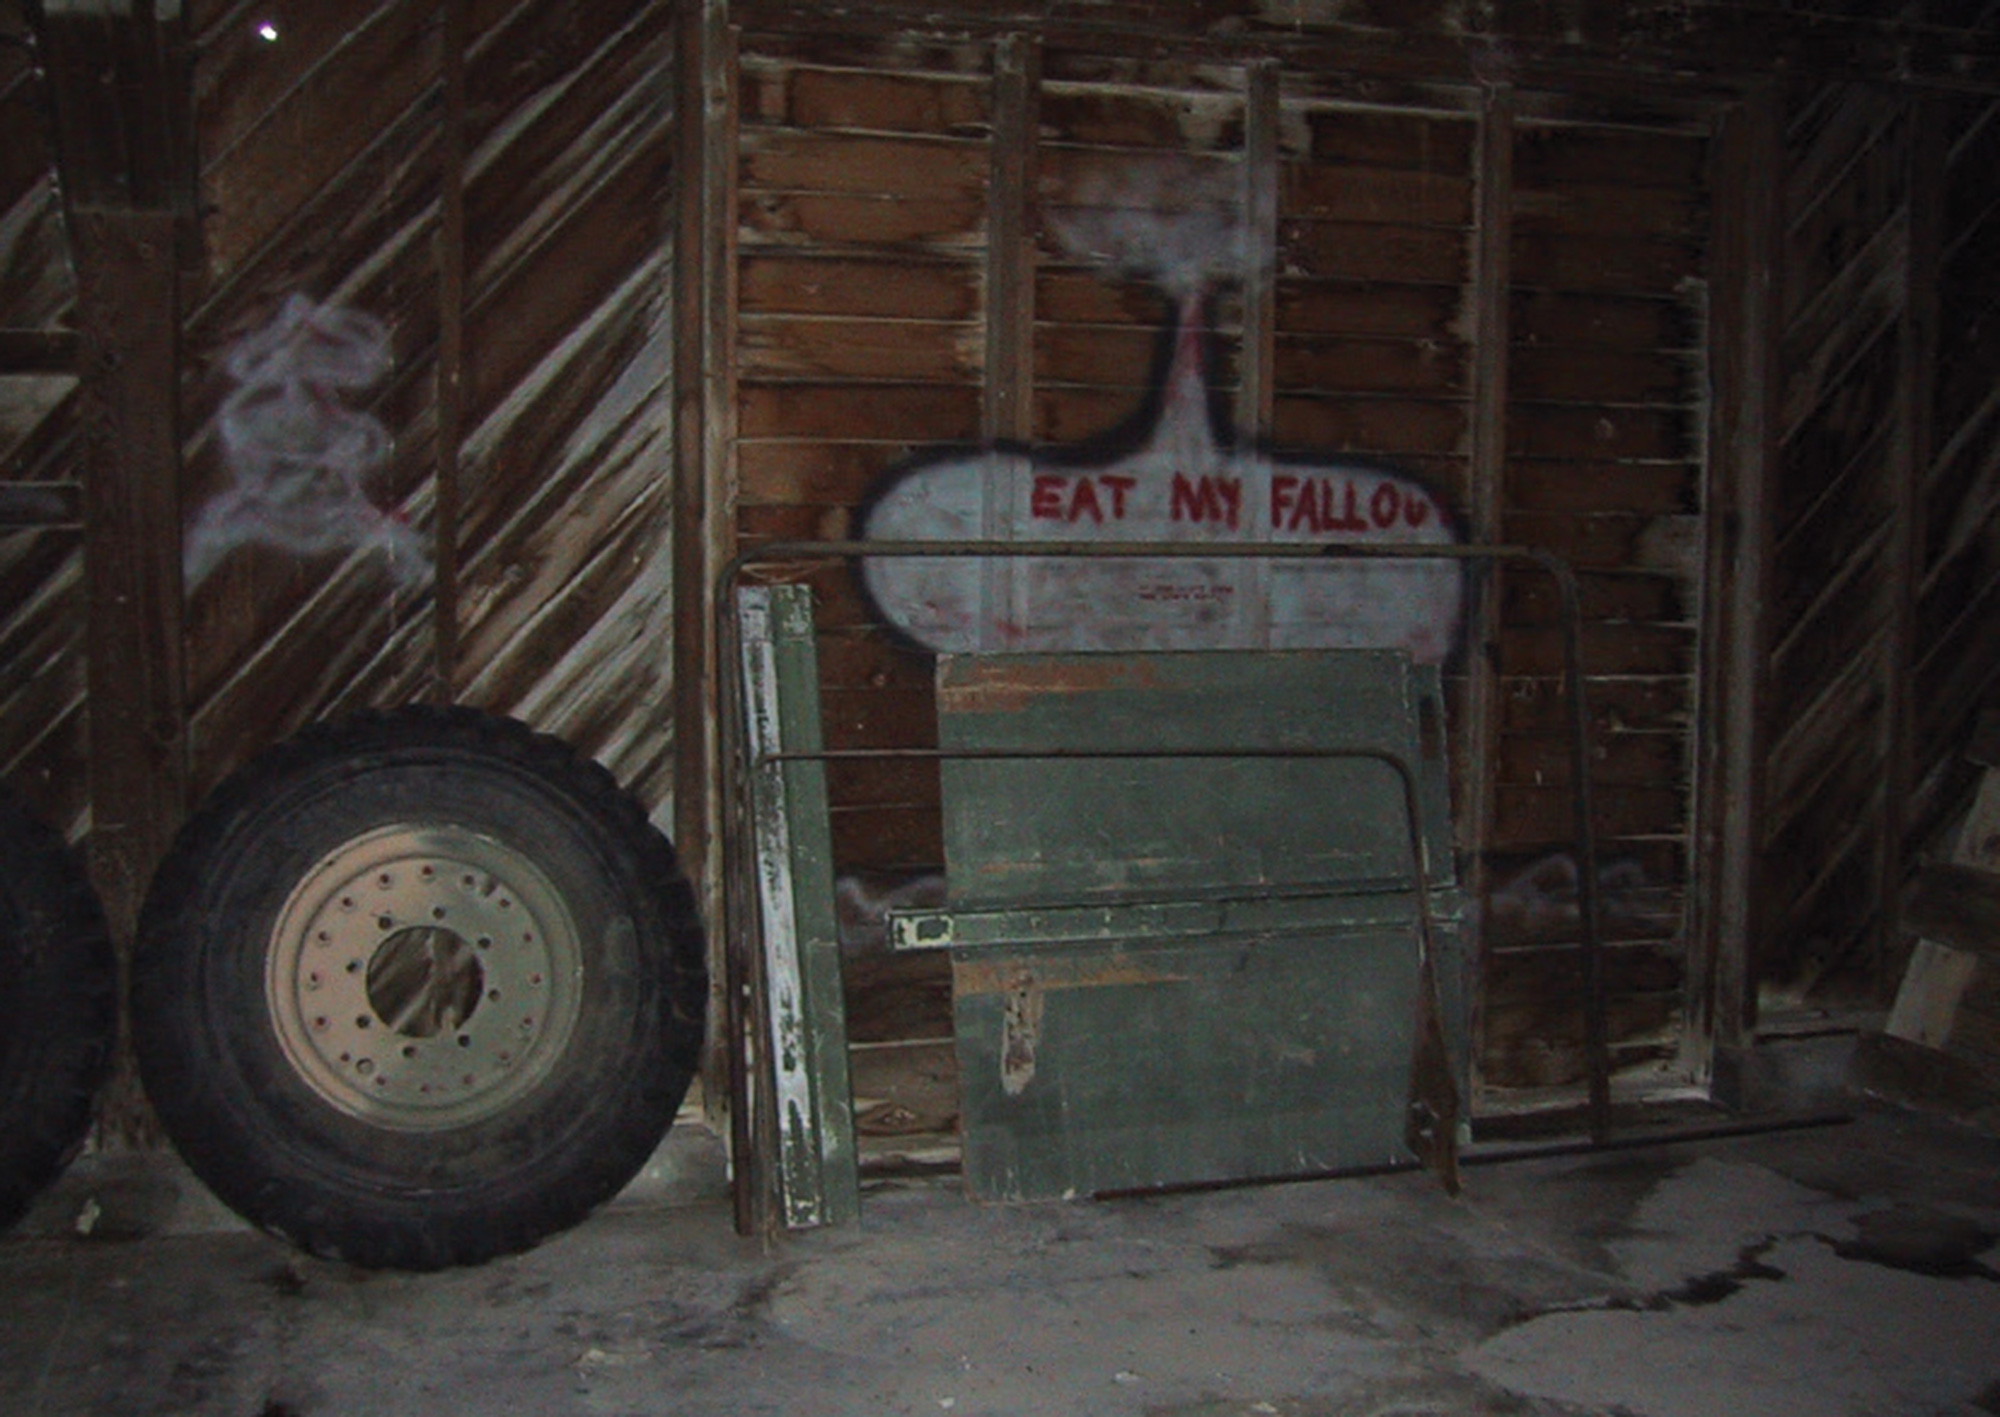 A photograph of graffiti on the inside of a wooden structure reading “Eat my fallout.”